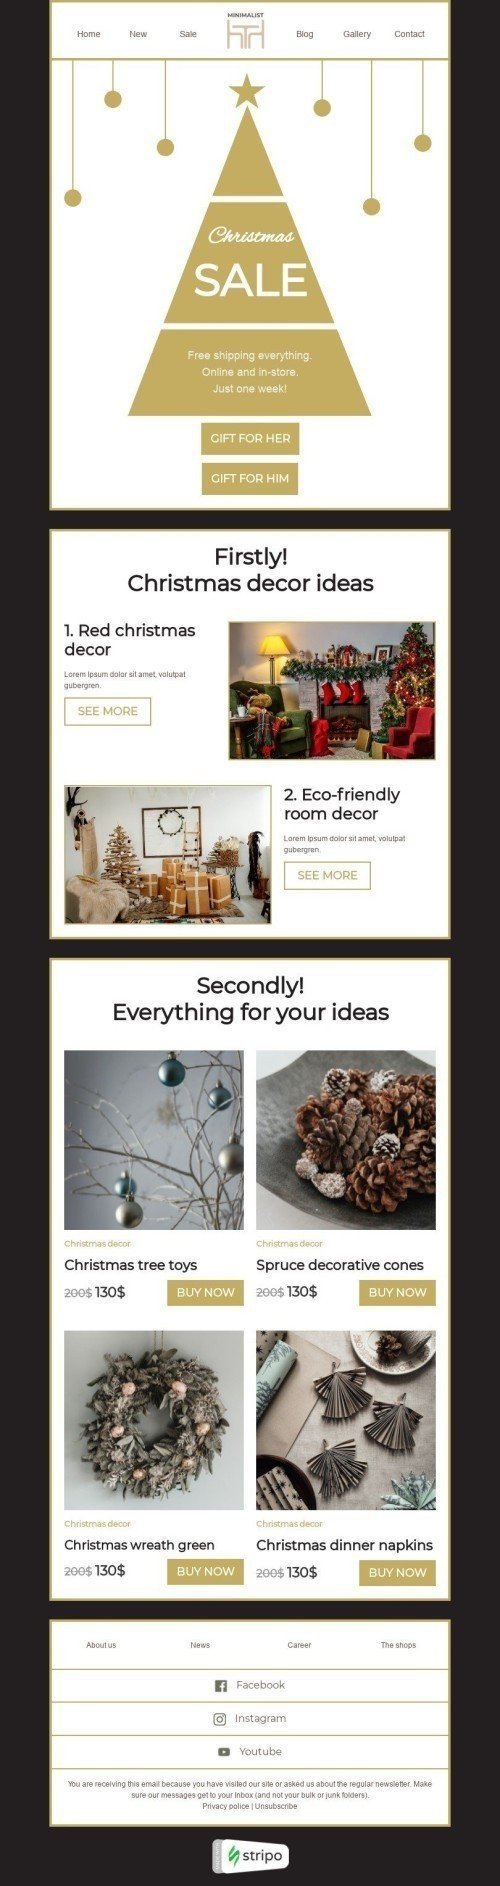 Christmas Email Template "Christmas decor ideas" for Furniture, Interior & DIY industry mobile view